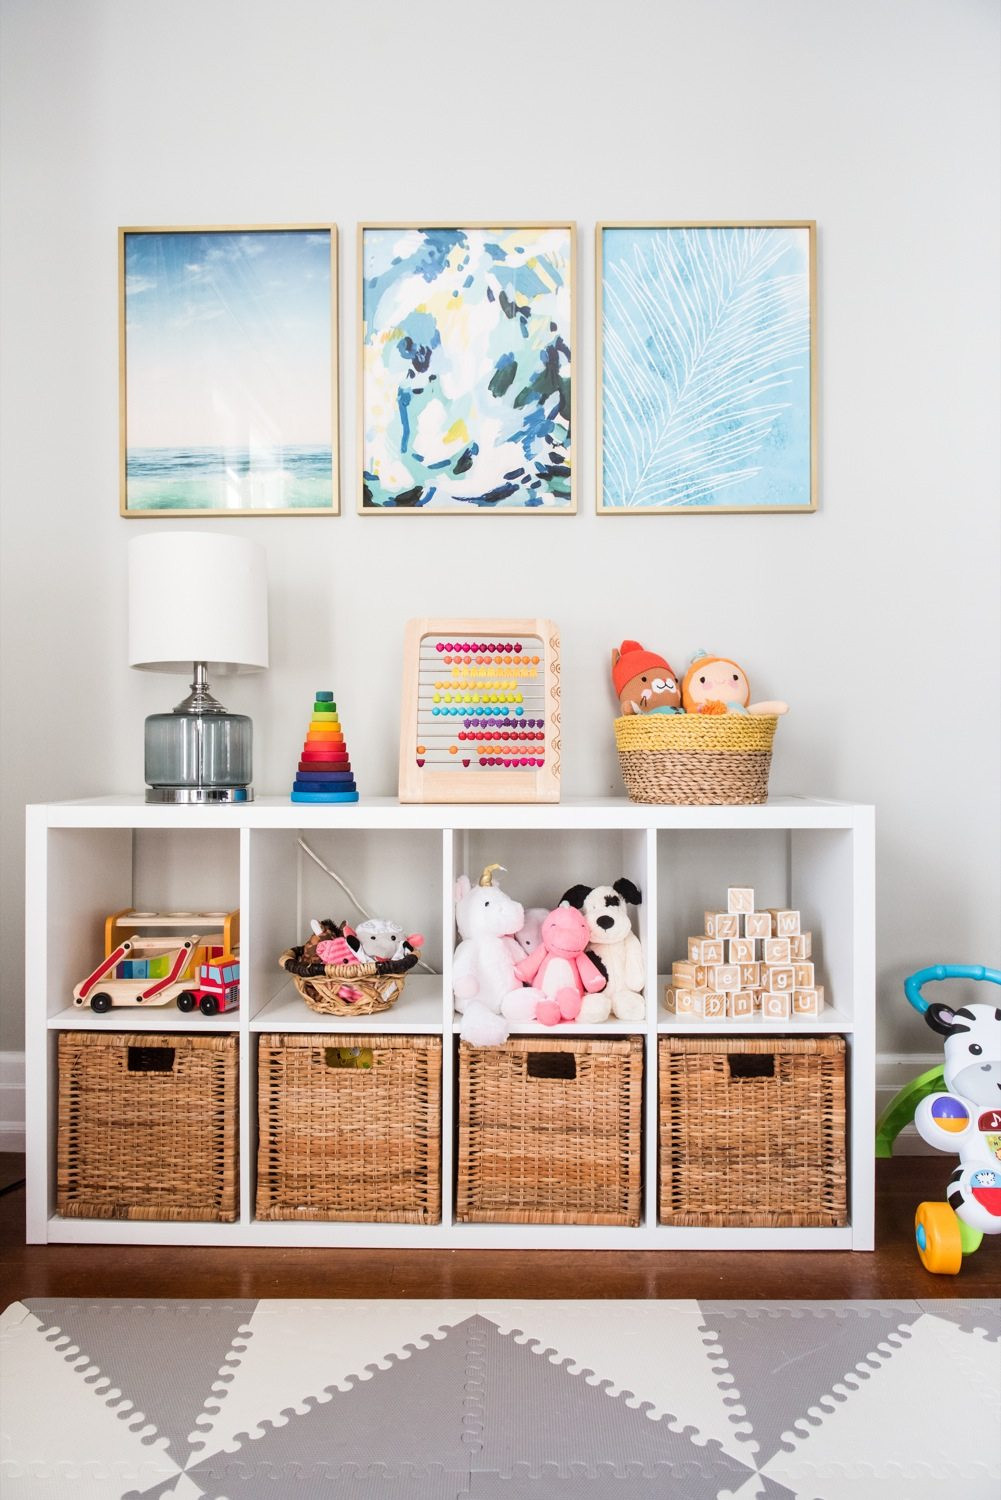 Kids Playroom Wall Art
 Emerson s Modern Playroom Tour The Sweetest Occasion